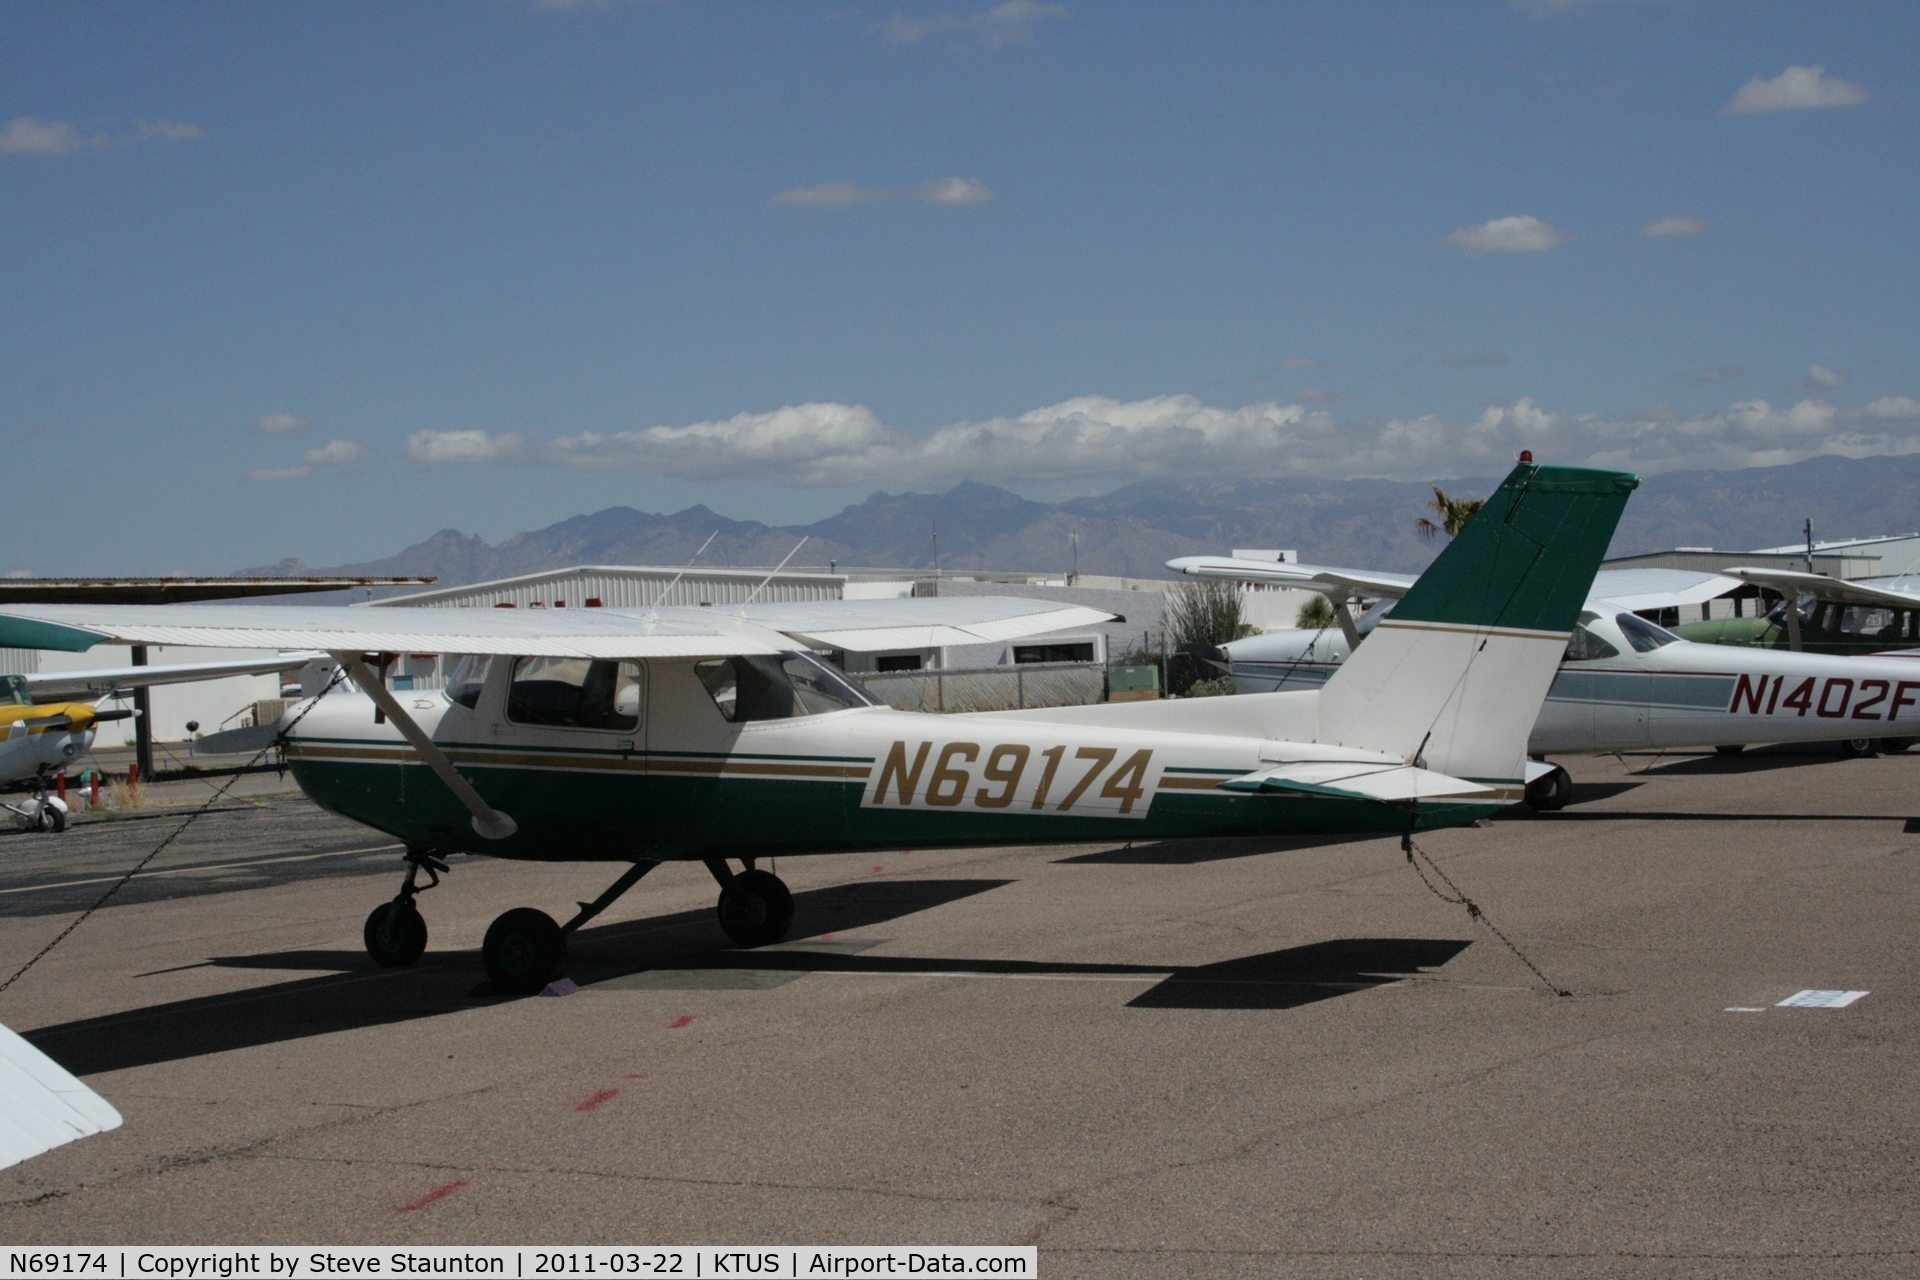 N69174, 1978 Cessna 152 C/N 15282528, Taken at Tucson International Airport, in March 2011 whilst on an Aeroprint Aviation tour